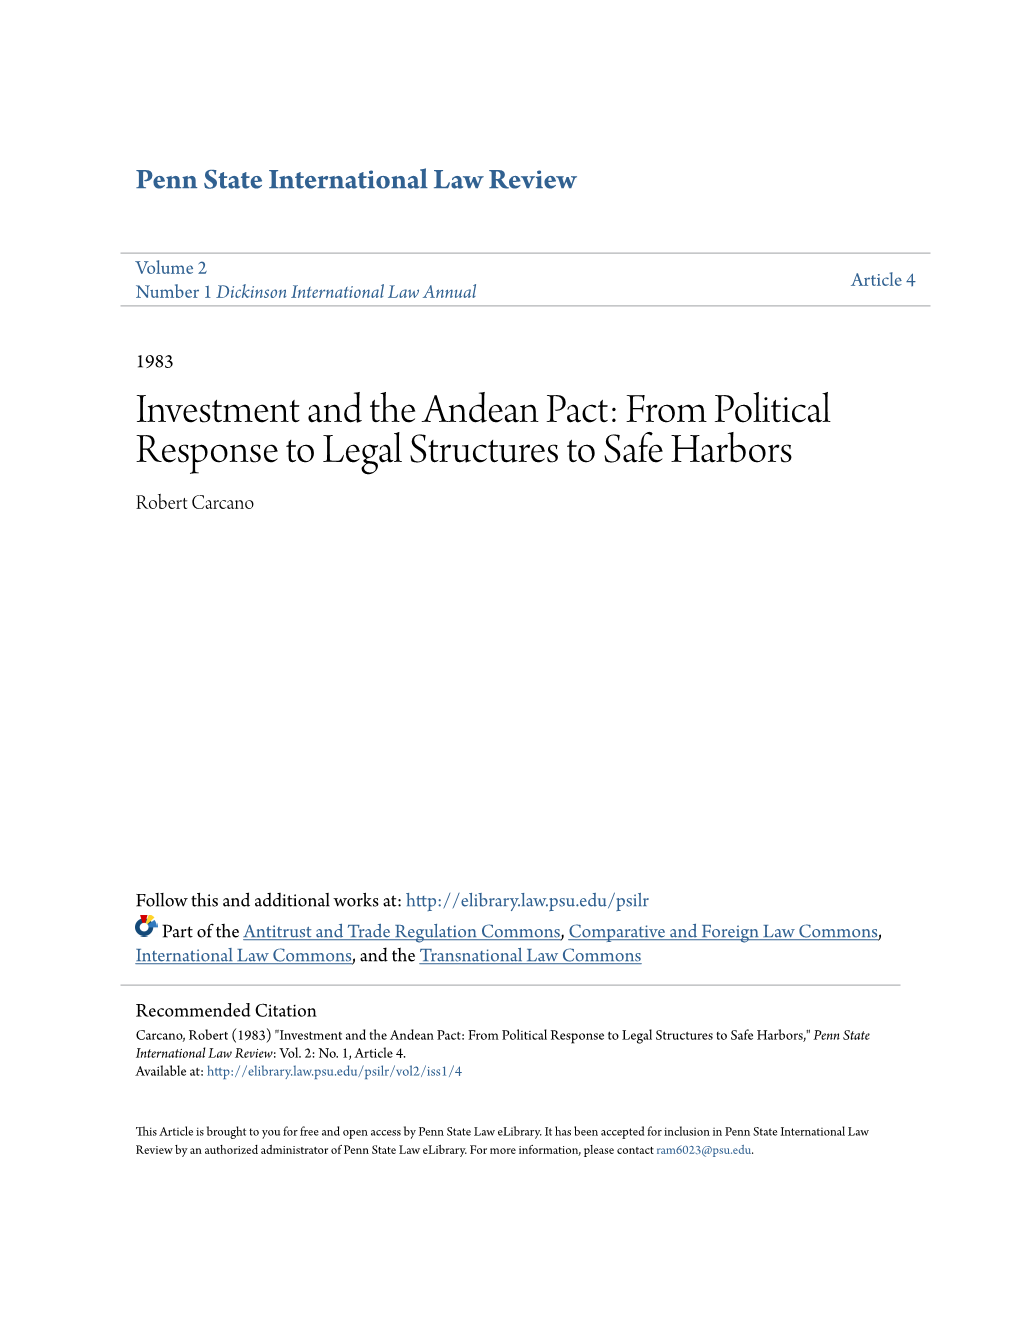 Investment and the Andean Pact: from Political Response to Legal Structures to Safe Harbors Robert Carcano